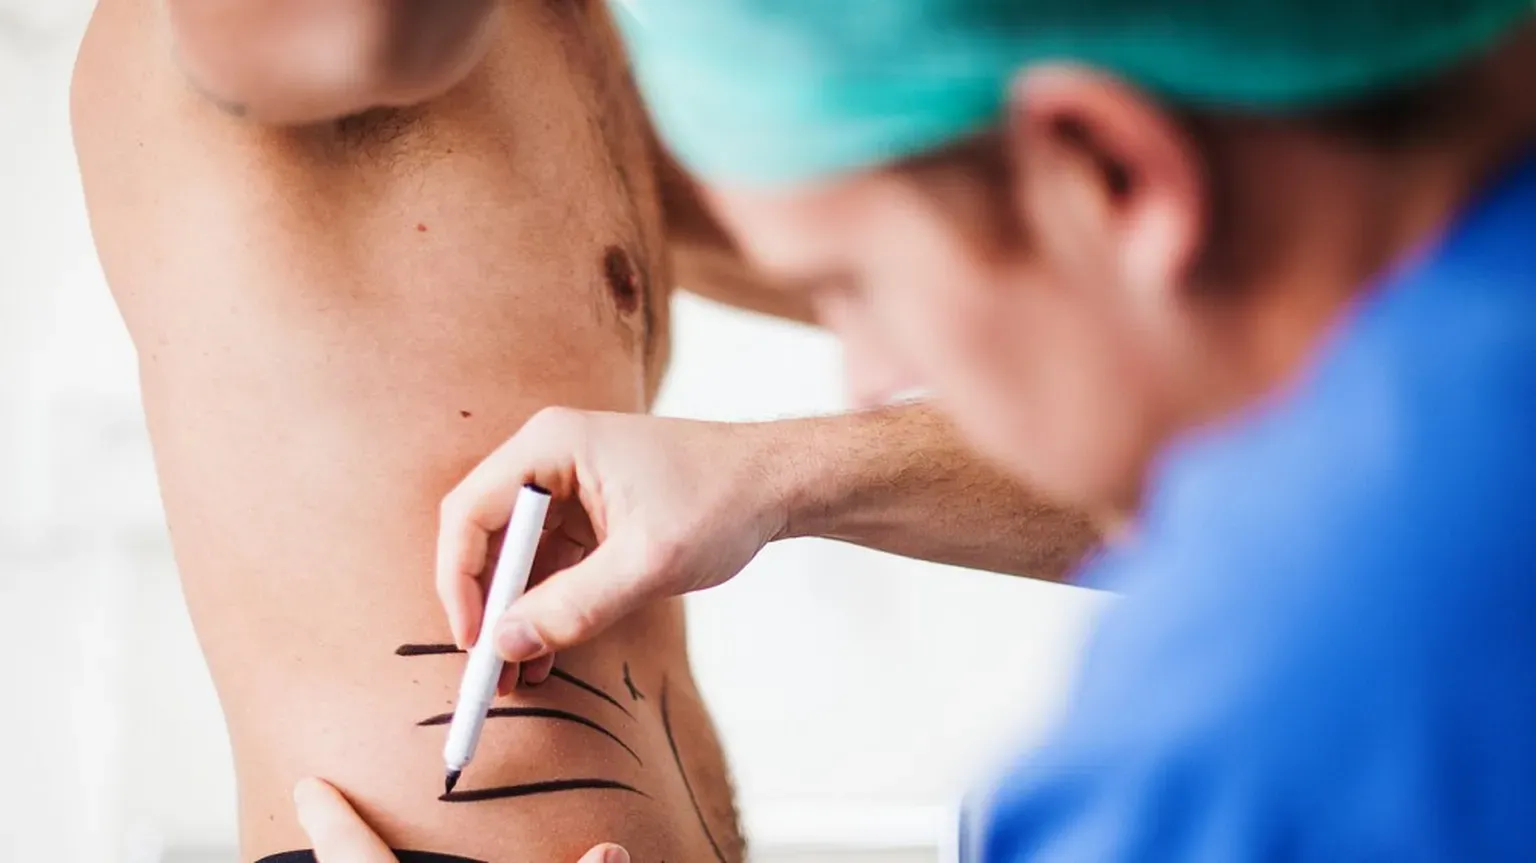 Doctor drawing on a man's midsection pre surgery